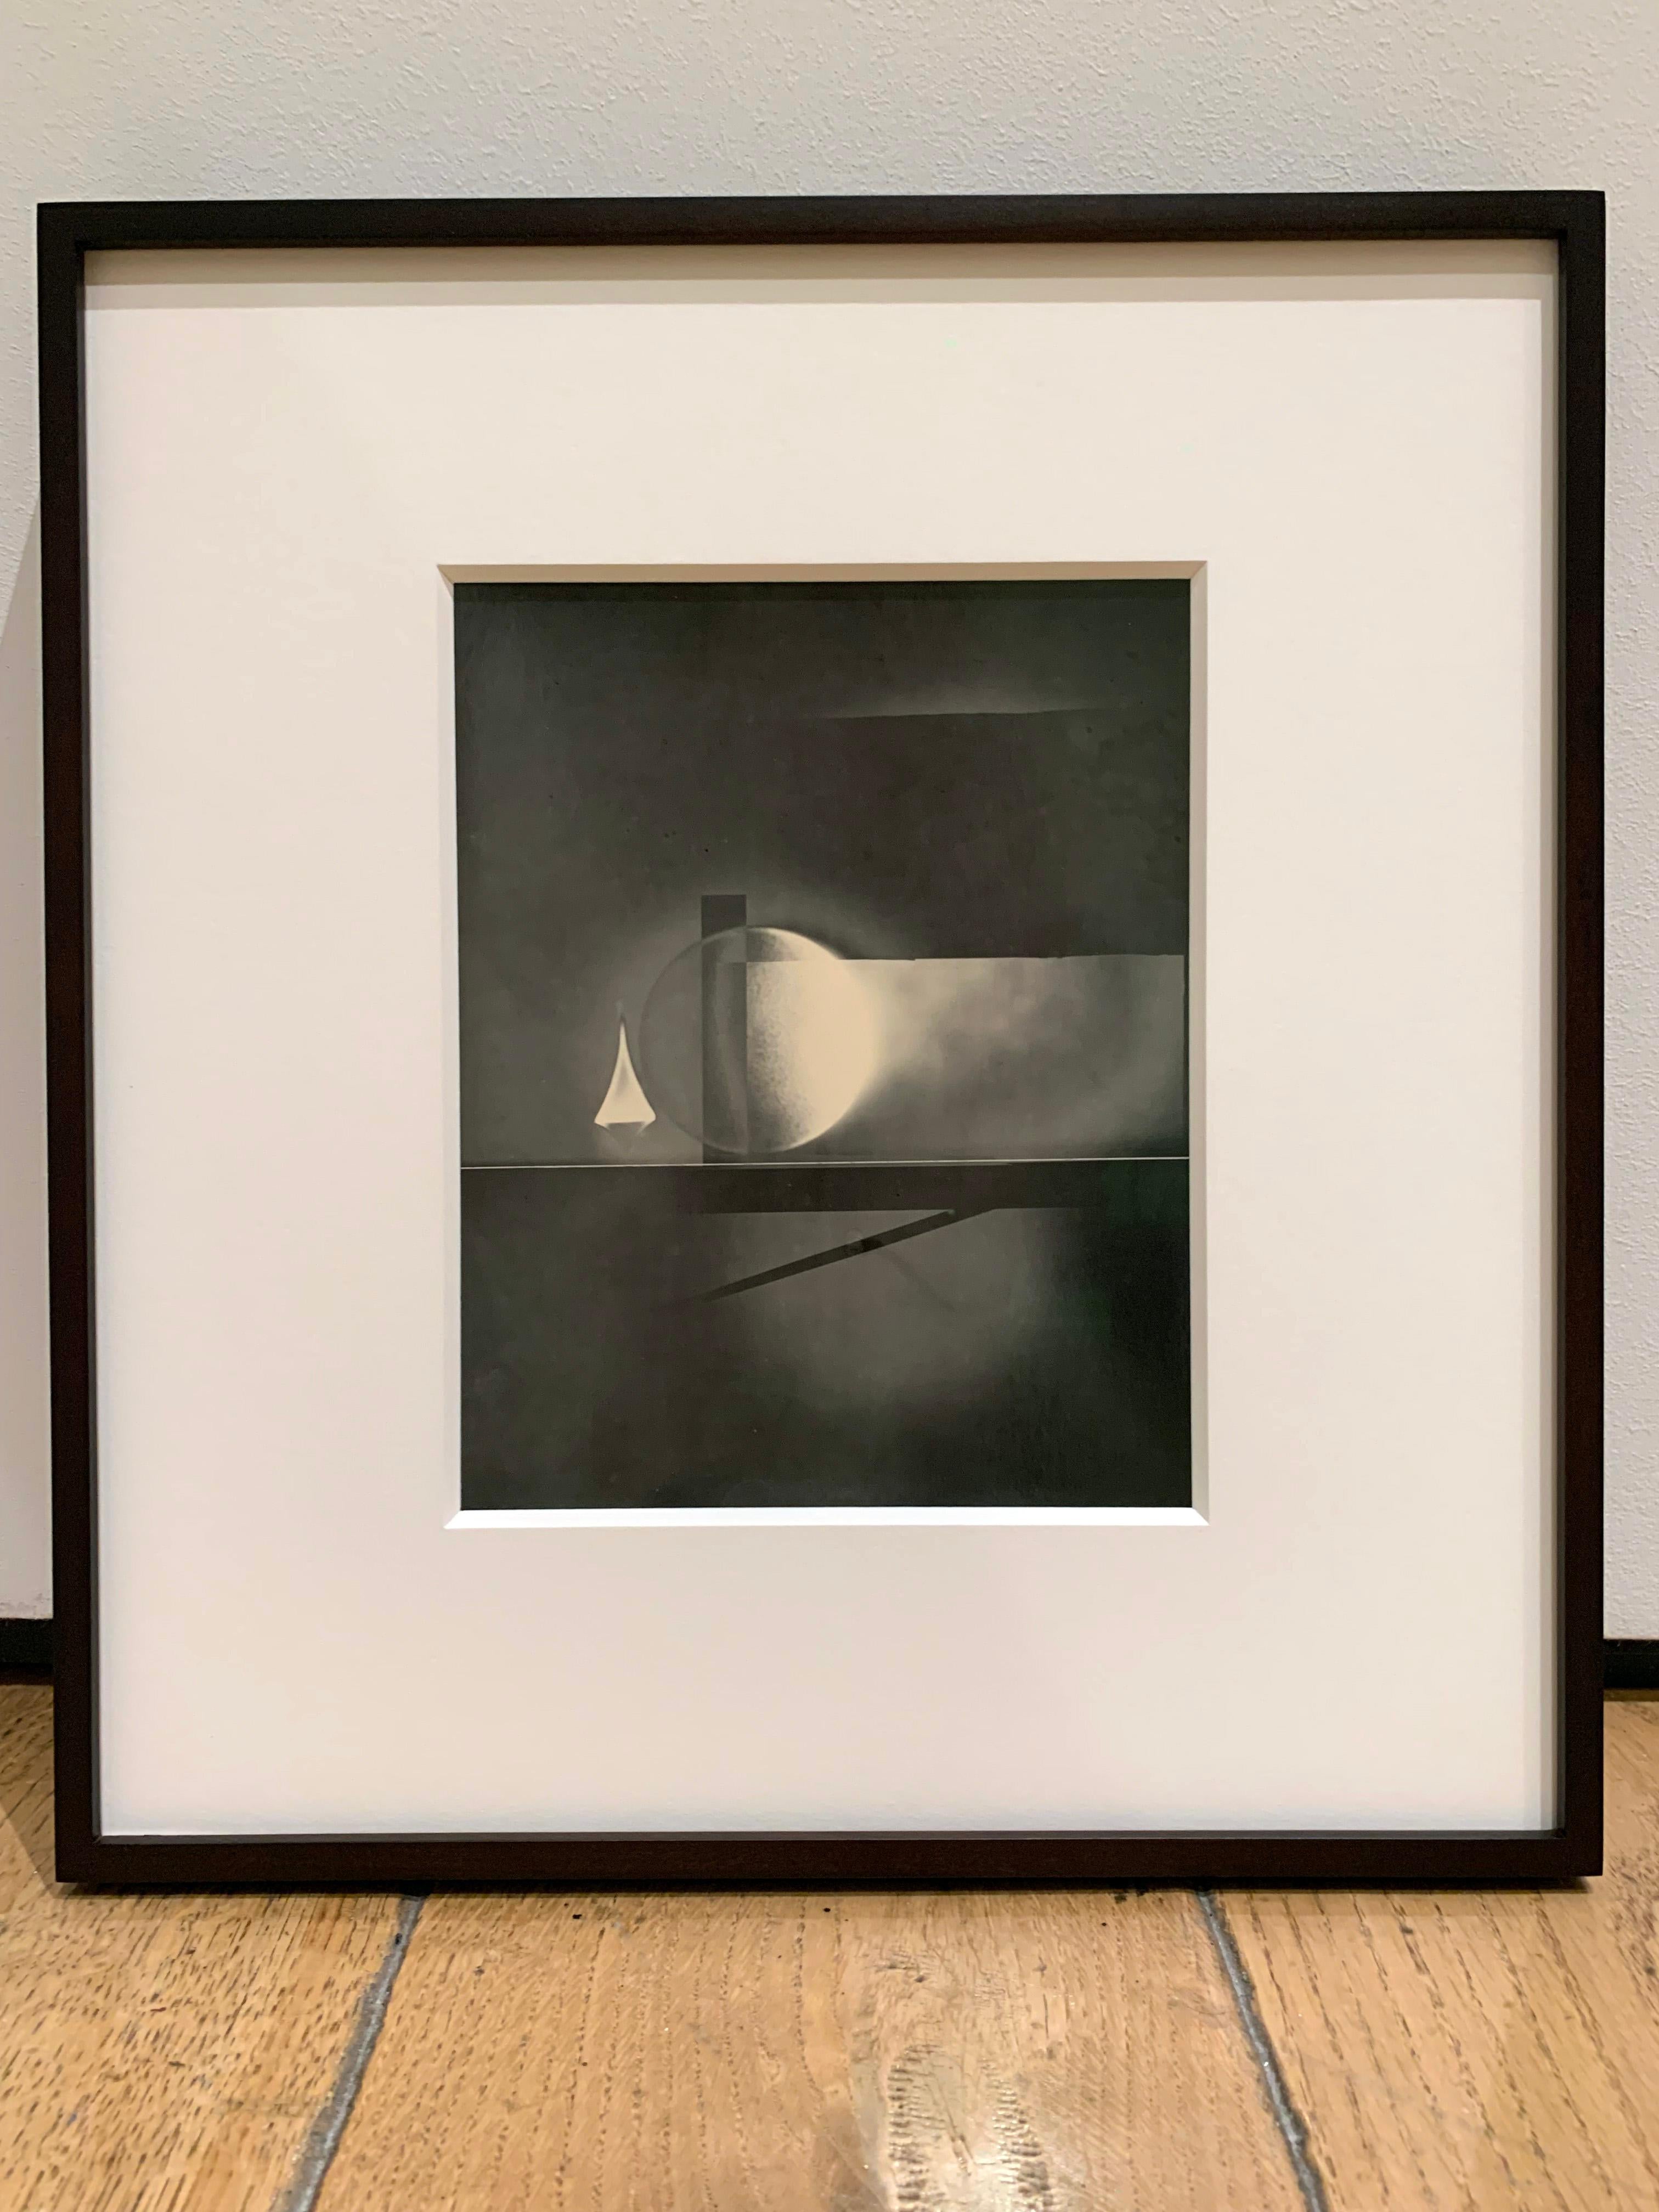 ATO>MIC #10, Unique Silver Luminogram Print, Abstract geometry in warm tones For Sale 2